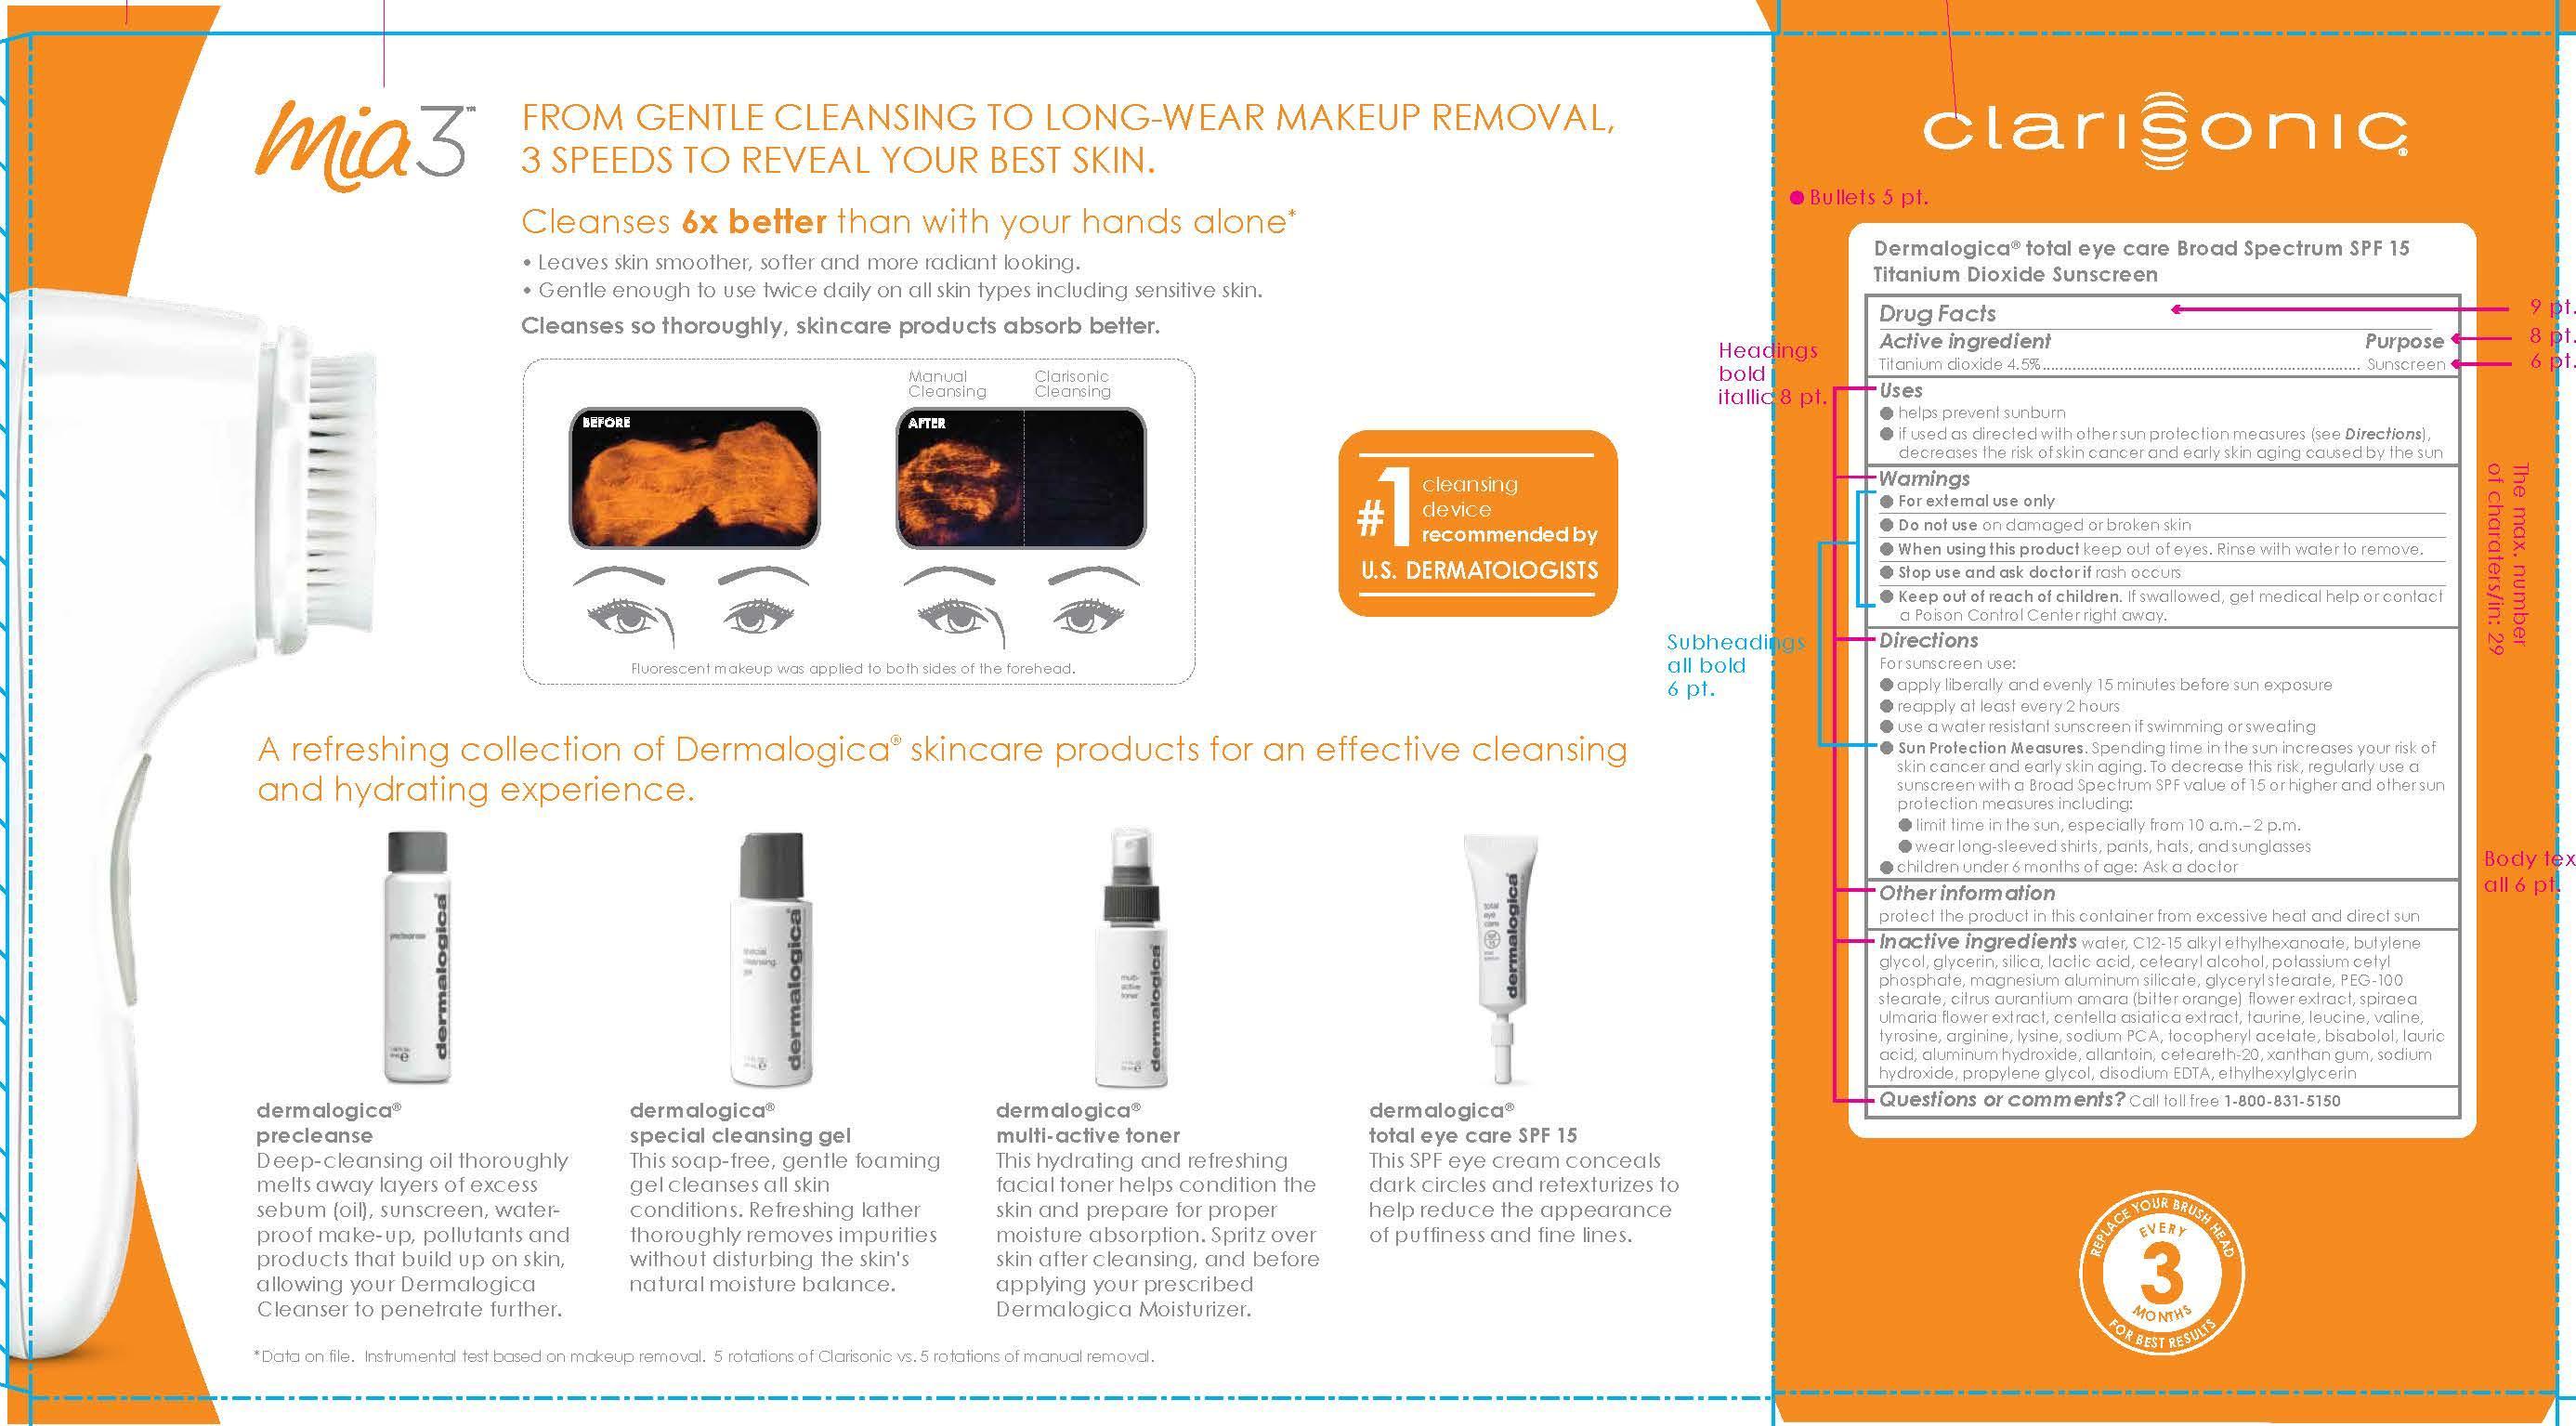 Is Clarisonic Mia 3 Facial Sonic Cleansing Brush With Dermalogica Total Eye Care Broad Spectrum Spf 15 Sunscreen safe while breastfeeding